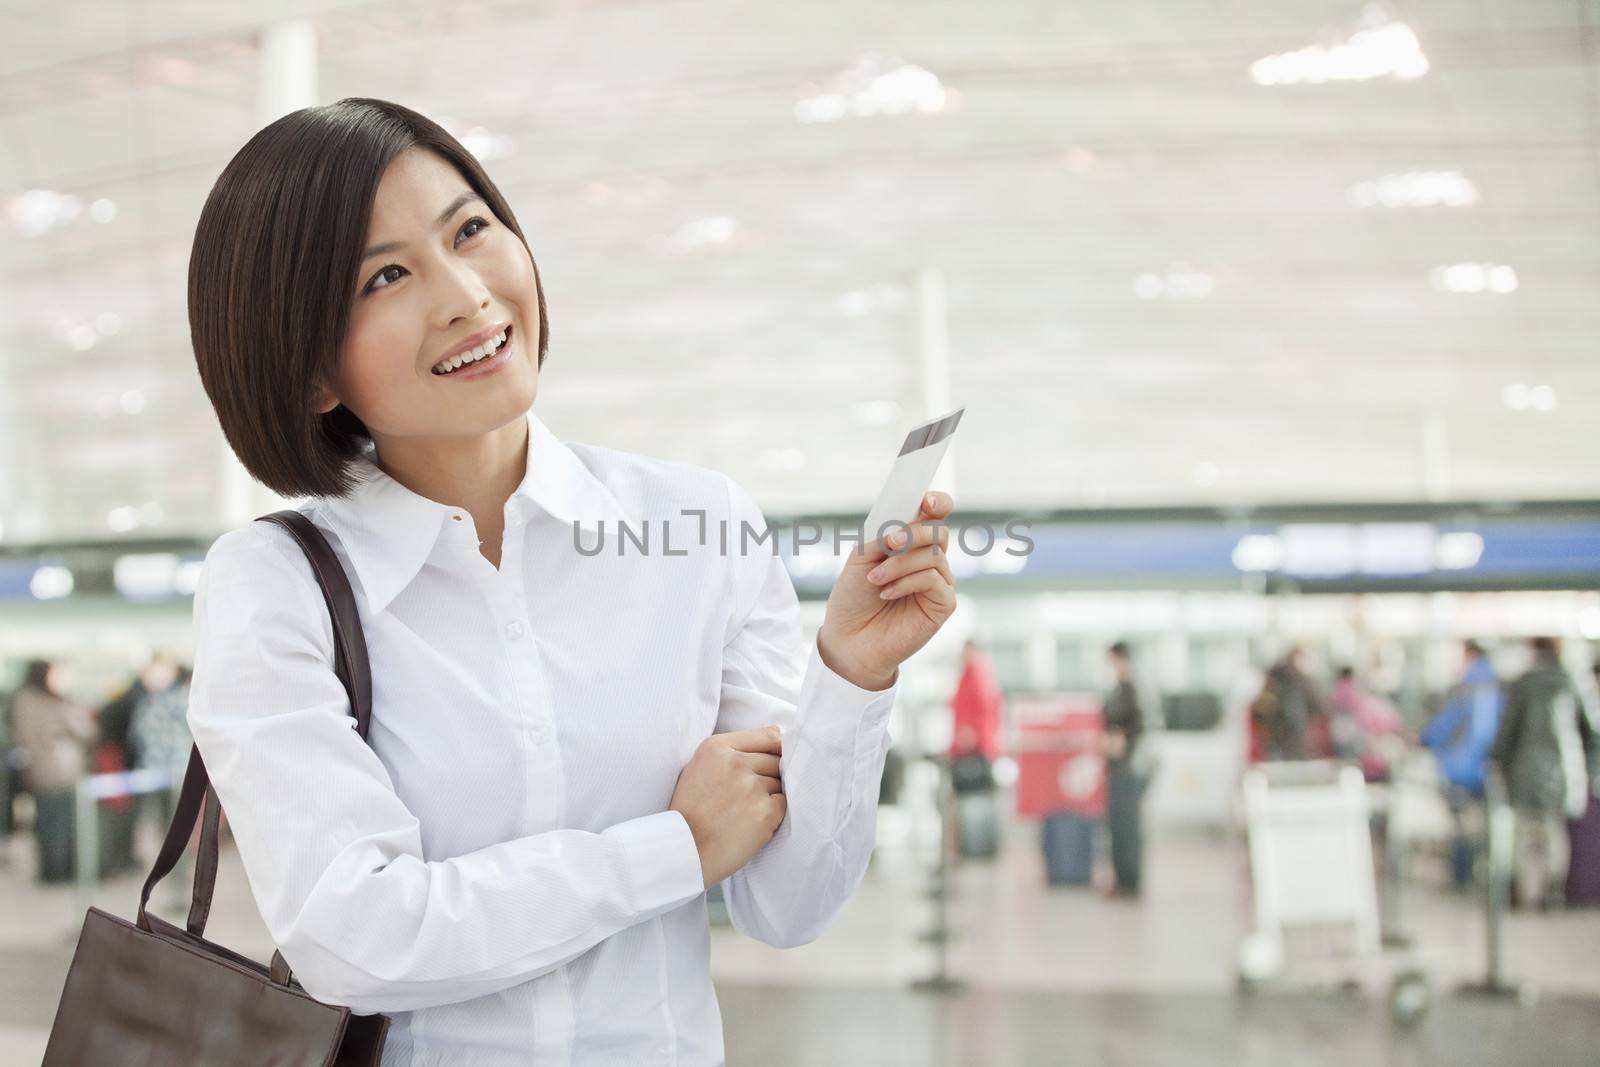 Young Woman Holding an Airplane Ticket